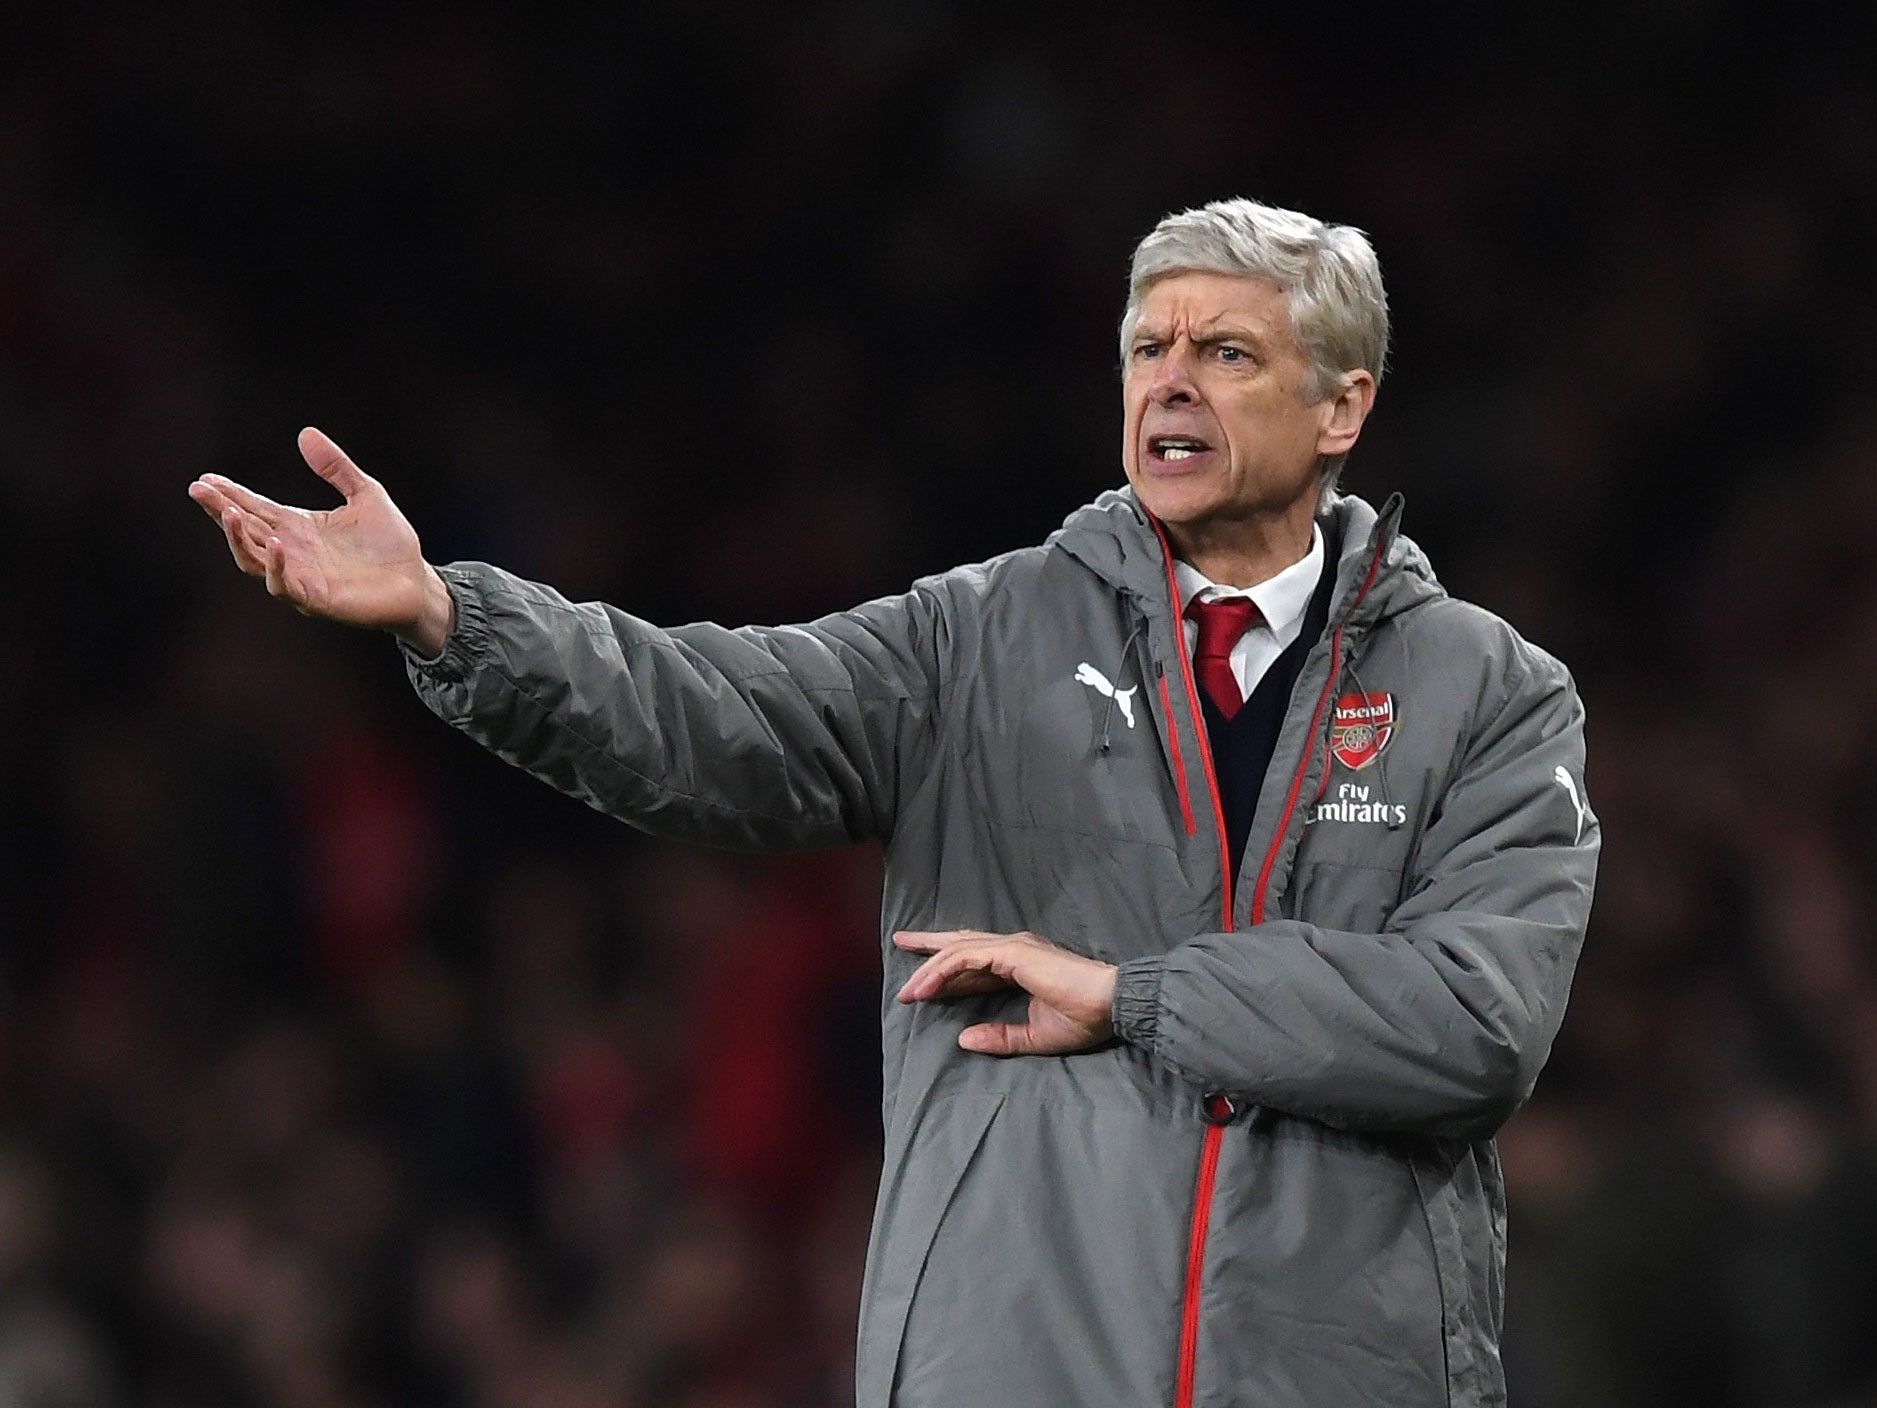 Arsene Wenger has come under intense pressure from sections of Arsenal's support